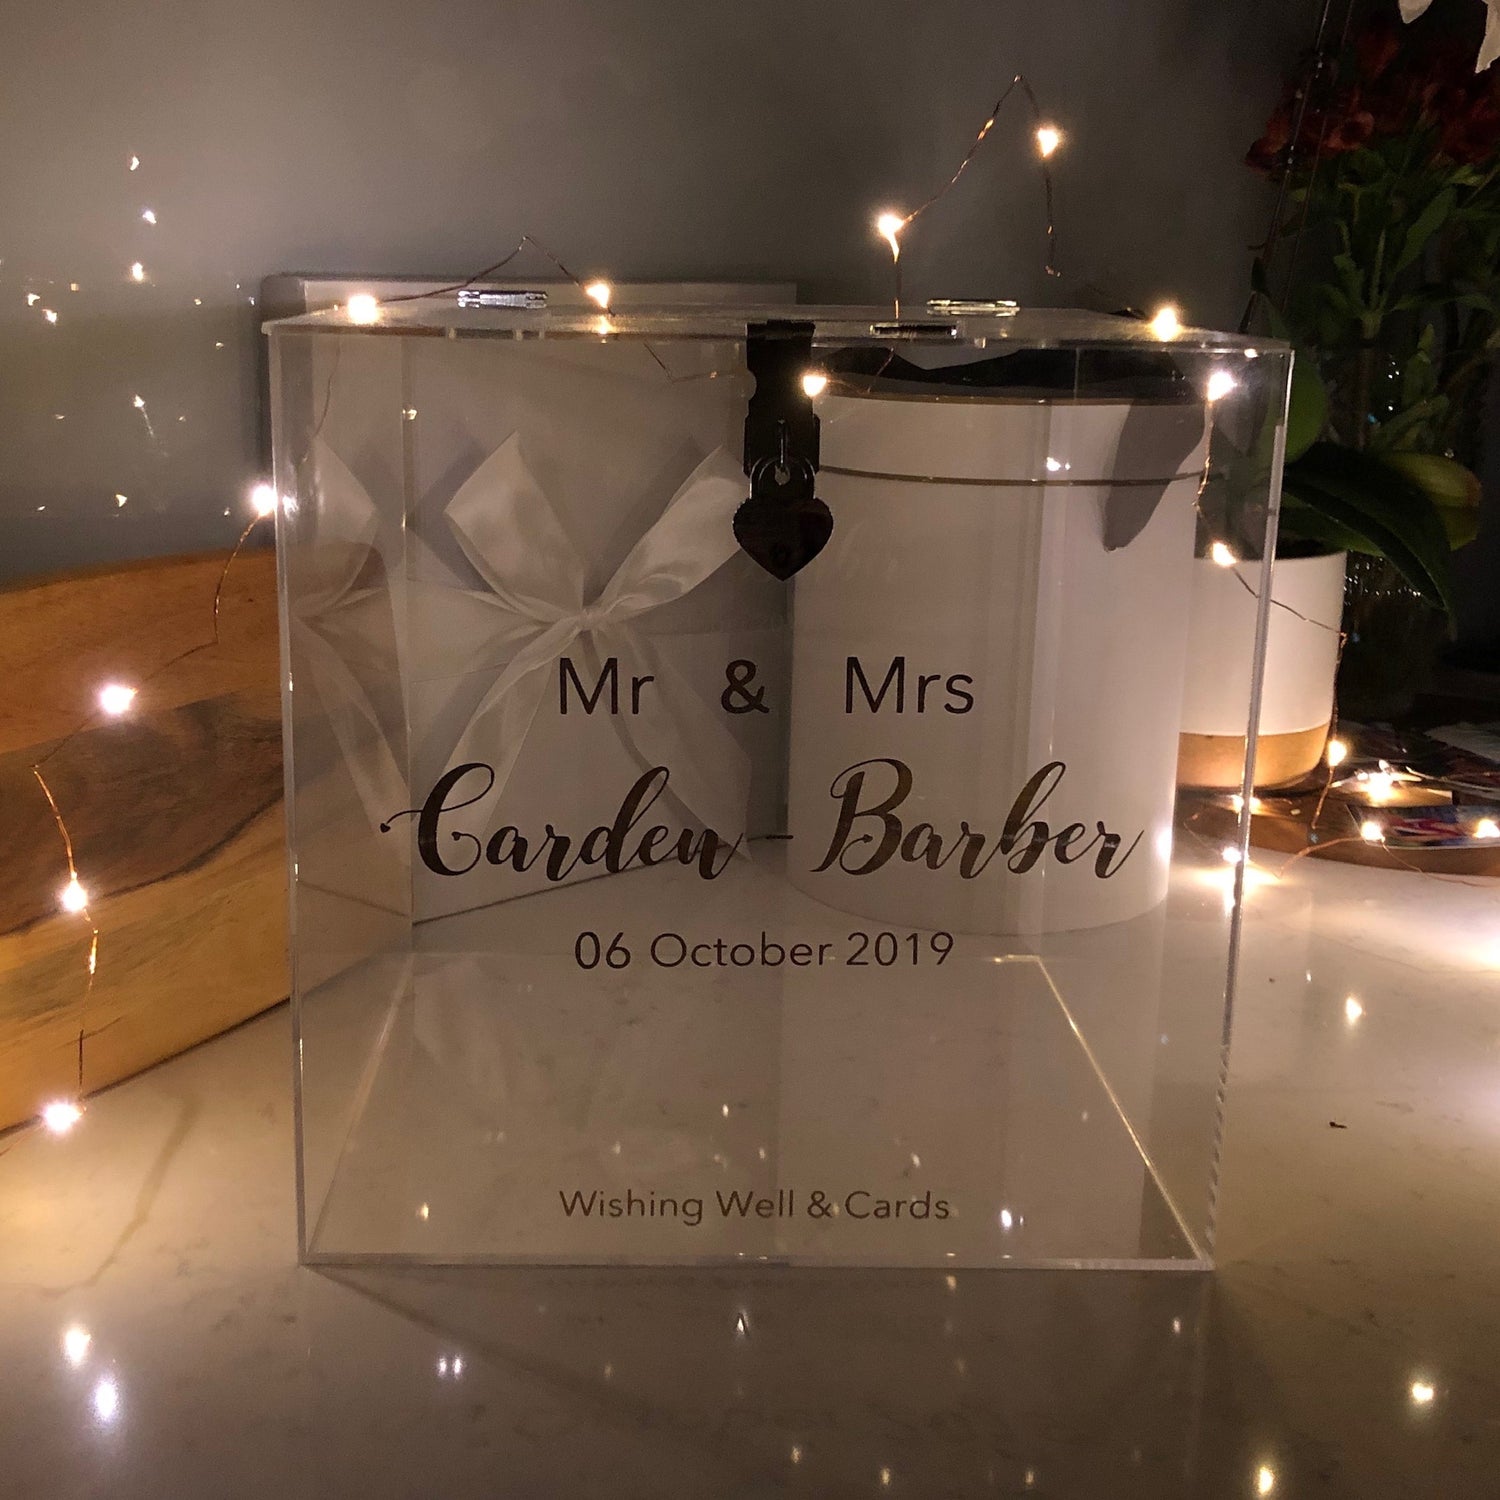 https://xox-with-love.myshopify.com/products/clear-acrylic-wishing-well-storage-gift-box?_pos=1&_sid=a9af81a05&_ss=r